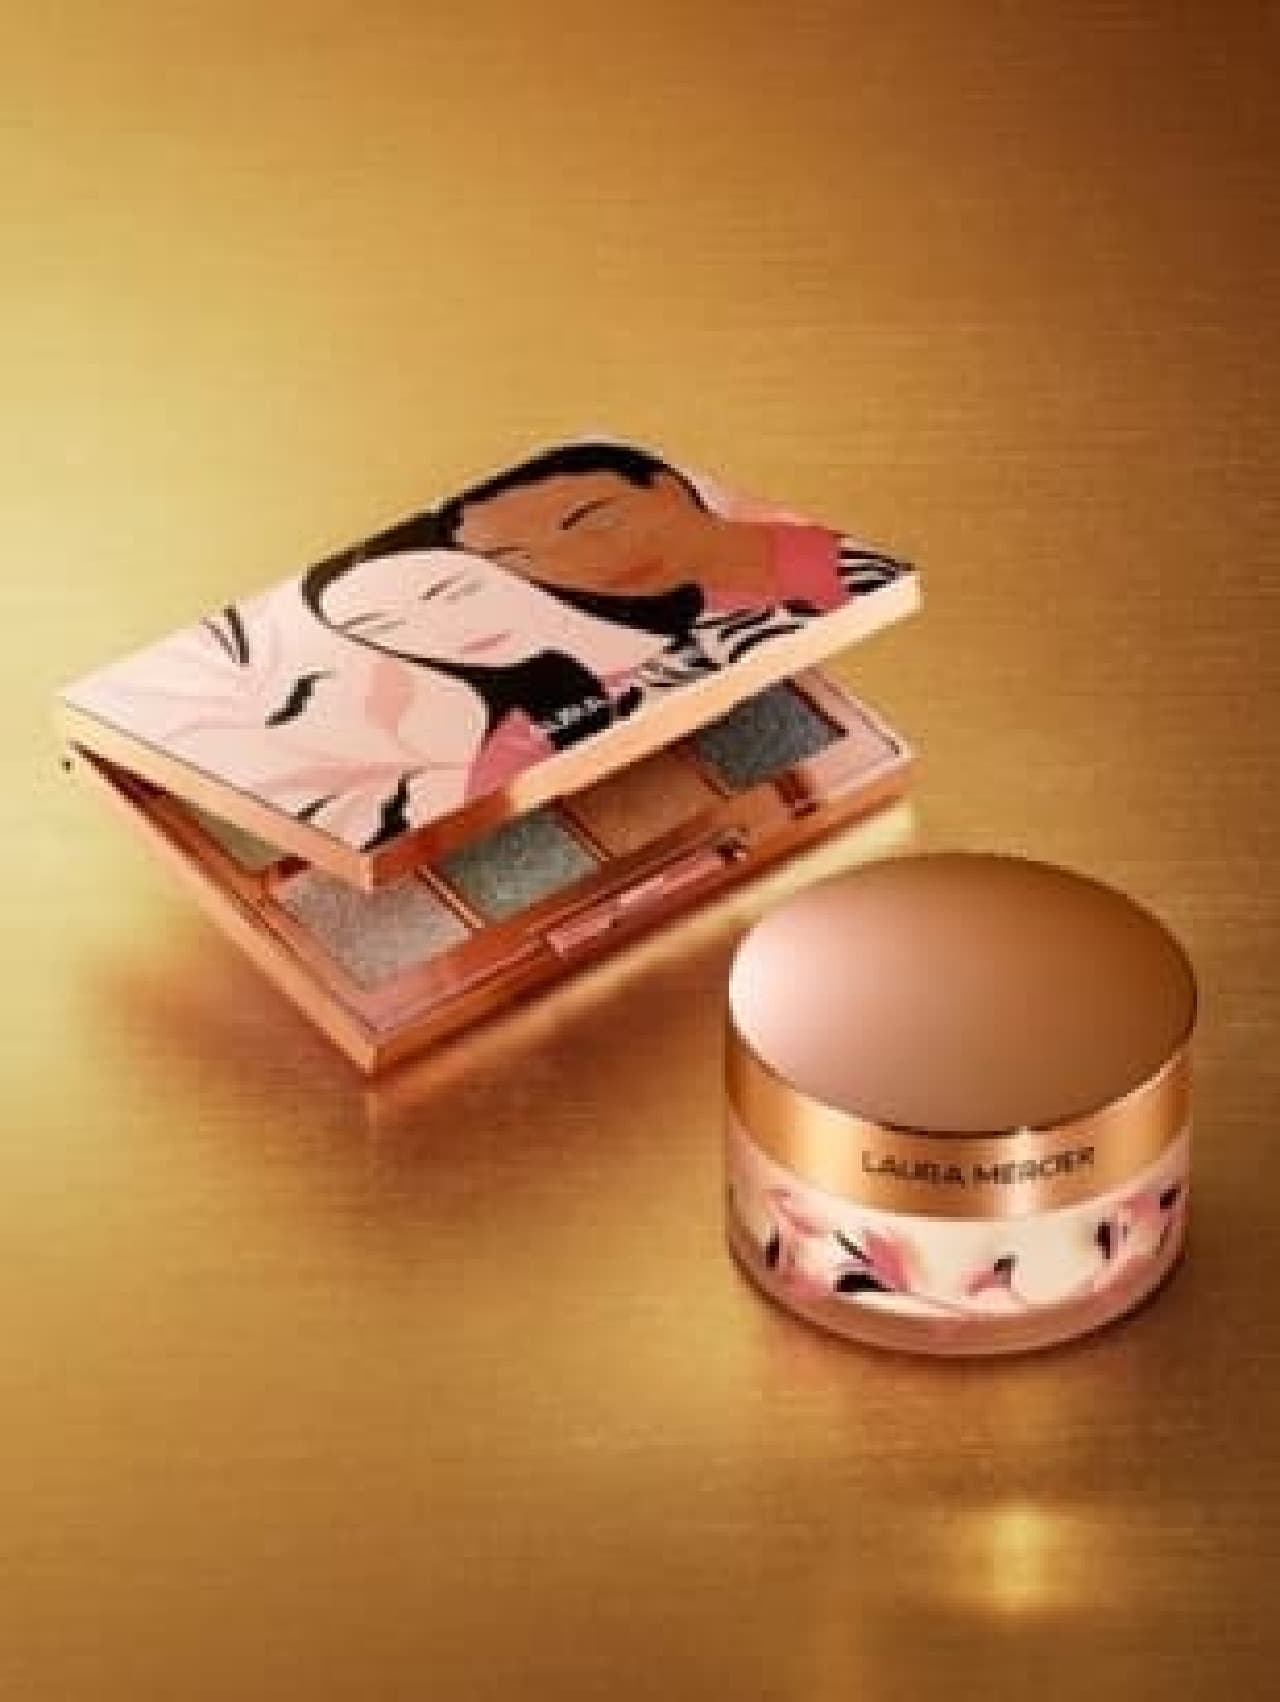 Laura Mercier's Holiday Collection "PAINT THE TOWN GOLD"